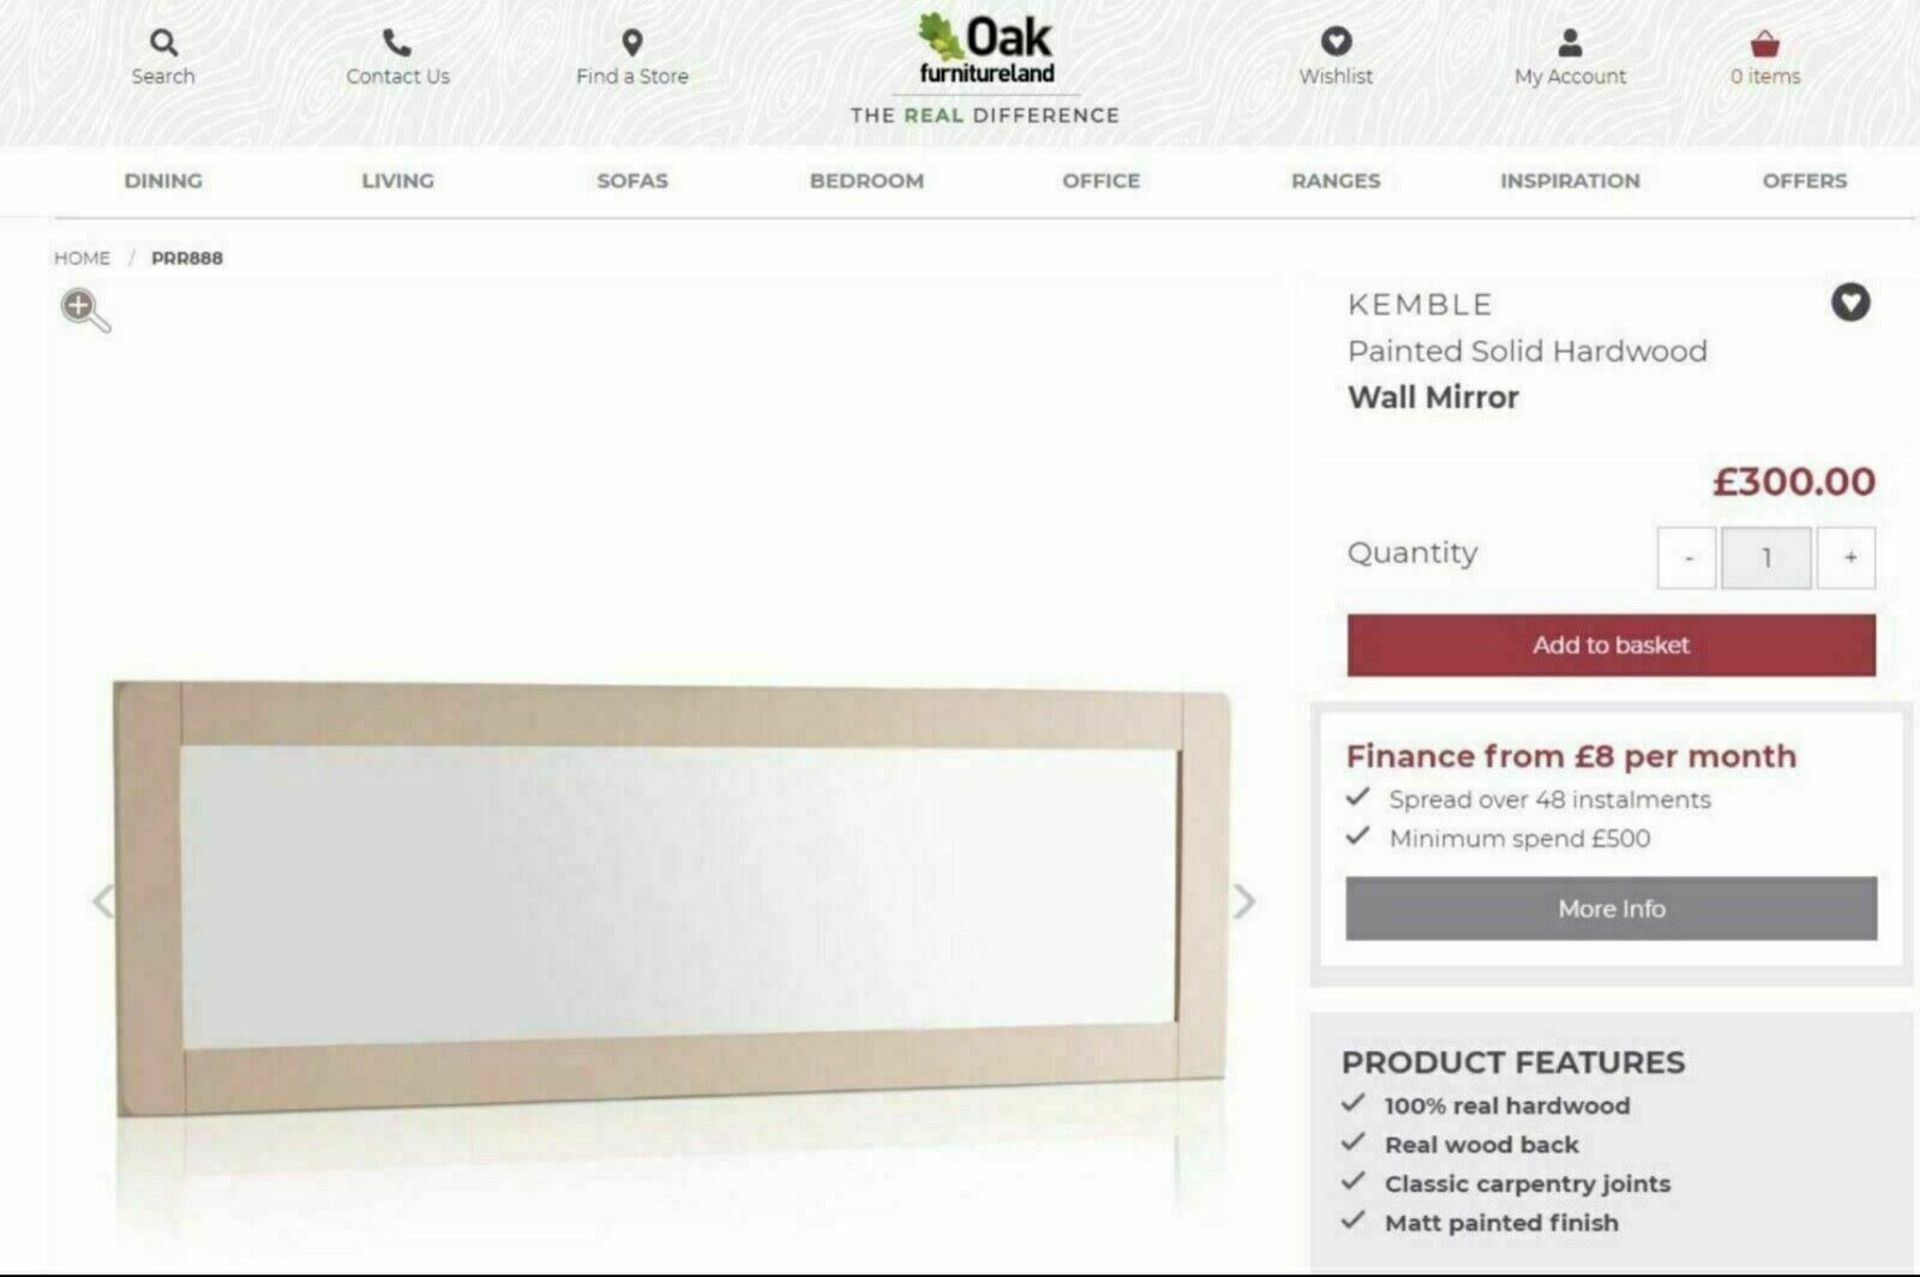 NEW BOXED KEMBLE RUSTIC SOLID OAK & PAINTED WALL MIRROR. 1800x600MM. RRP £300 EACH. 100% OAK, REAL